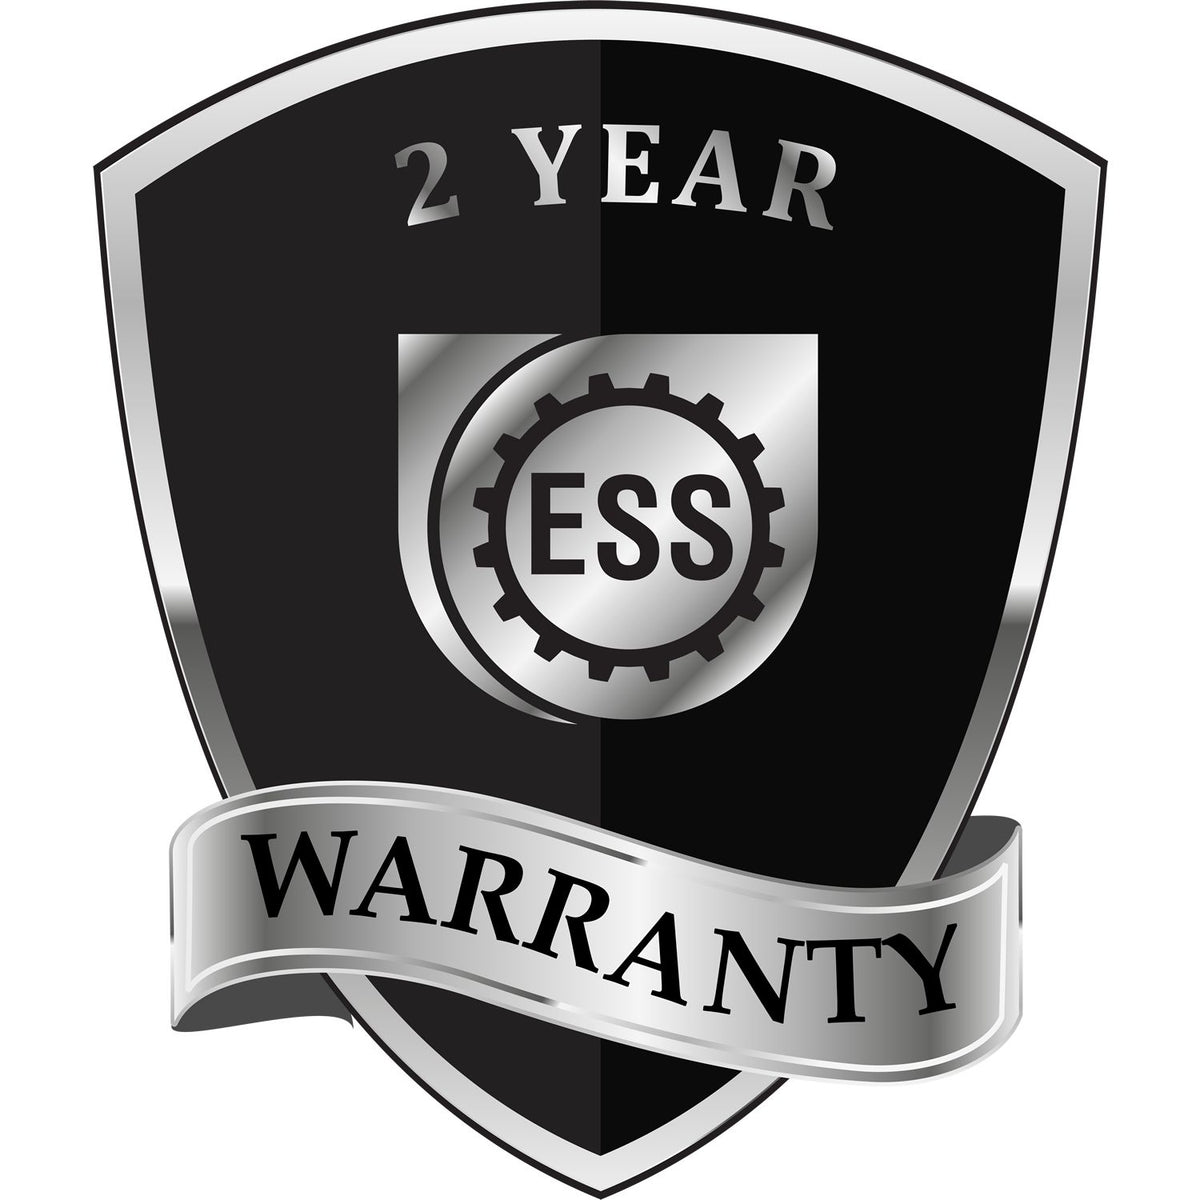 A badge or emblem showing a warranty icon for the State of Maine Extended Long Reach Engineer Seal